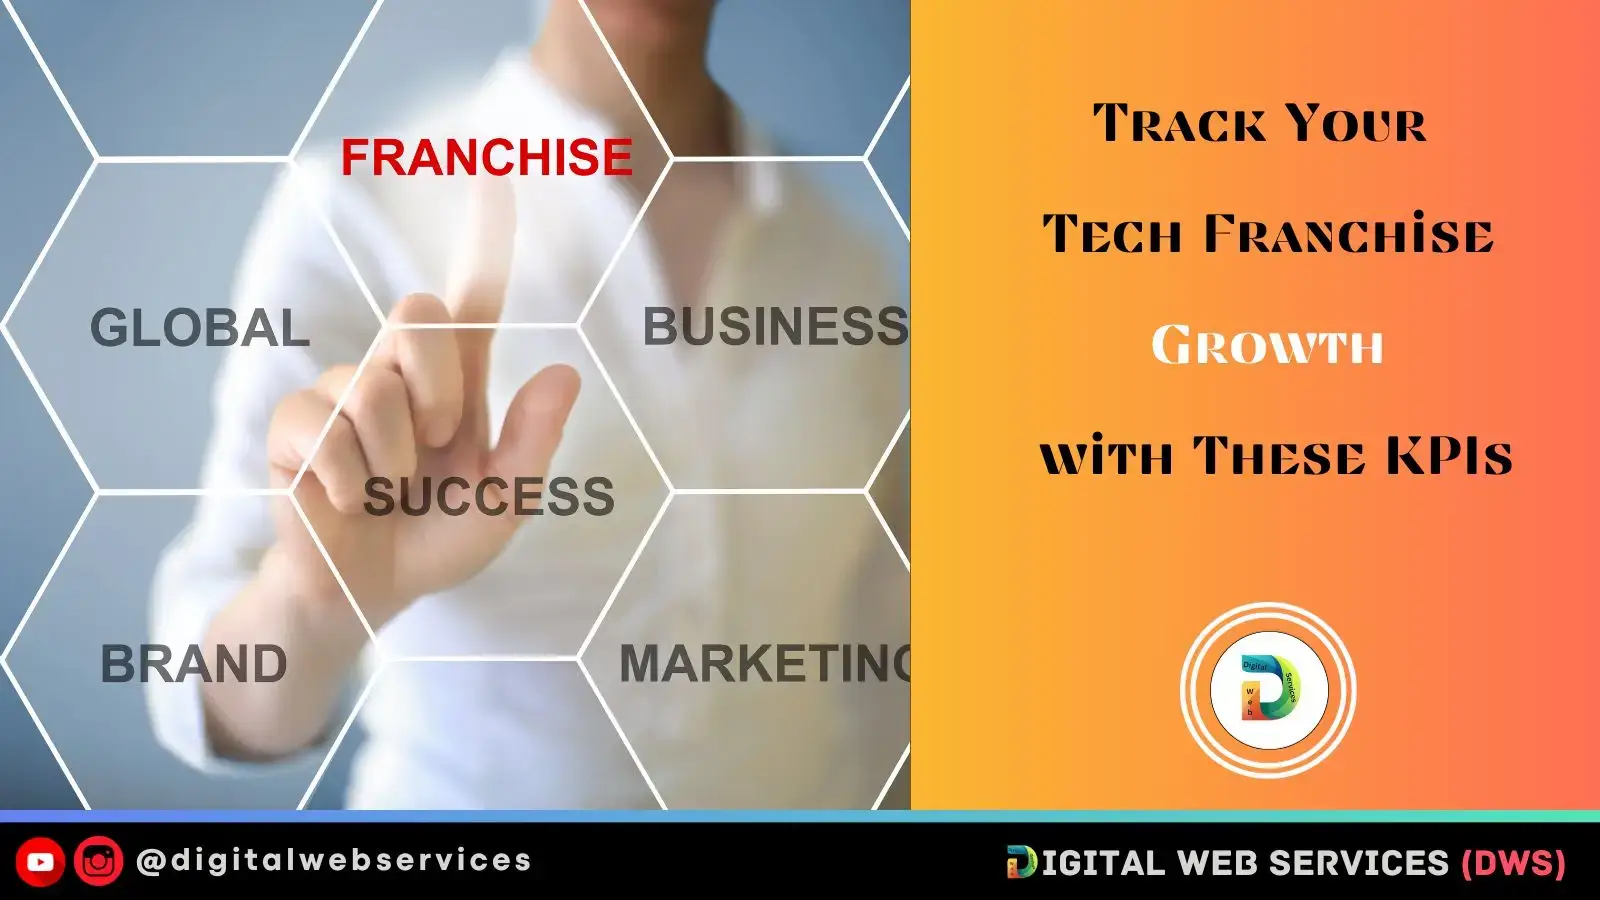 Tech Franchise Growth with KPIs